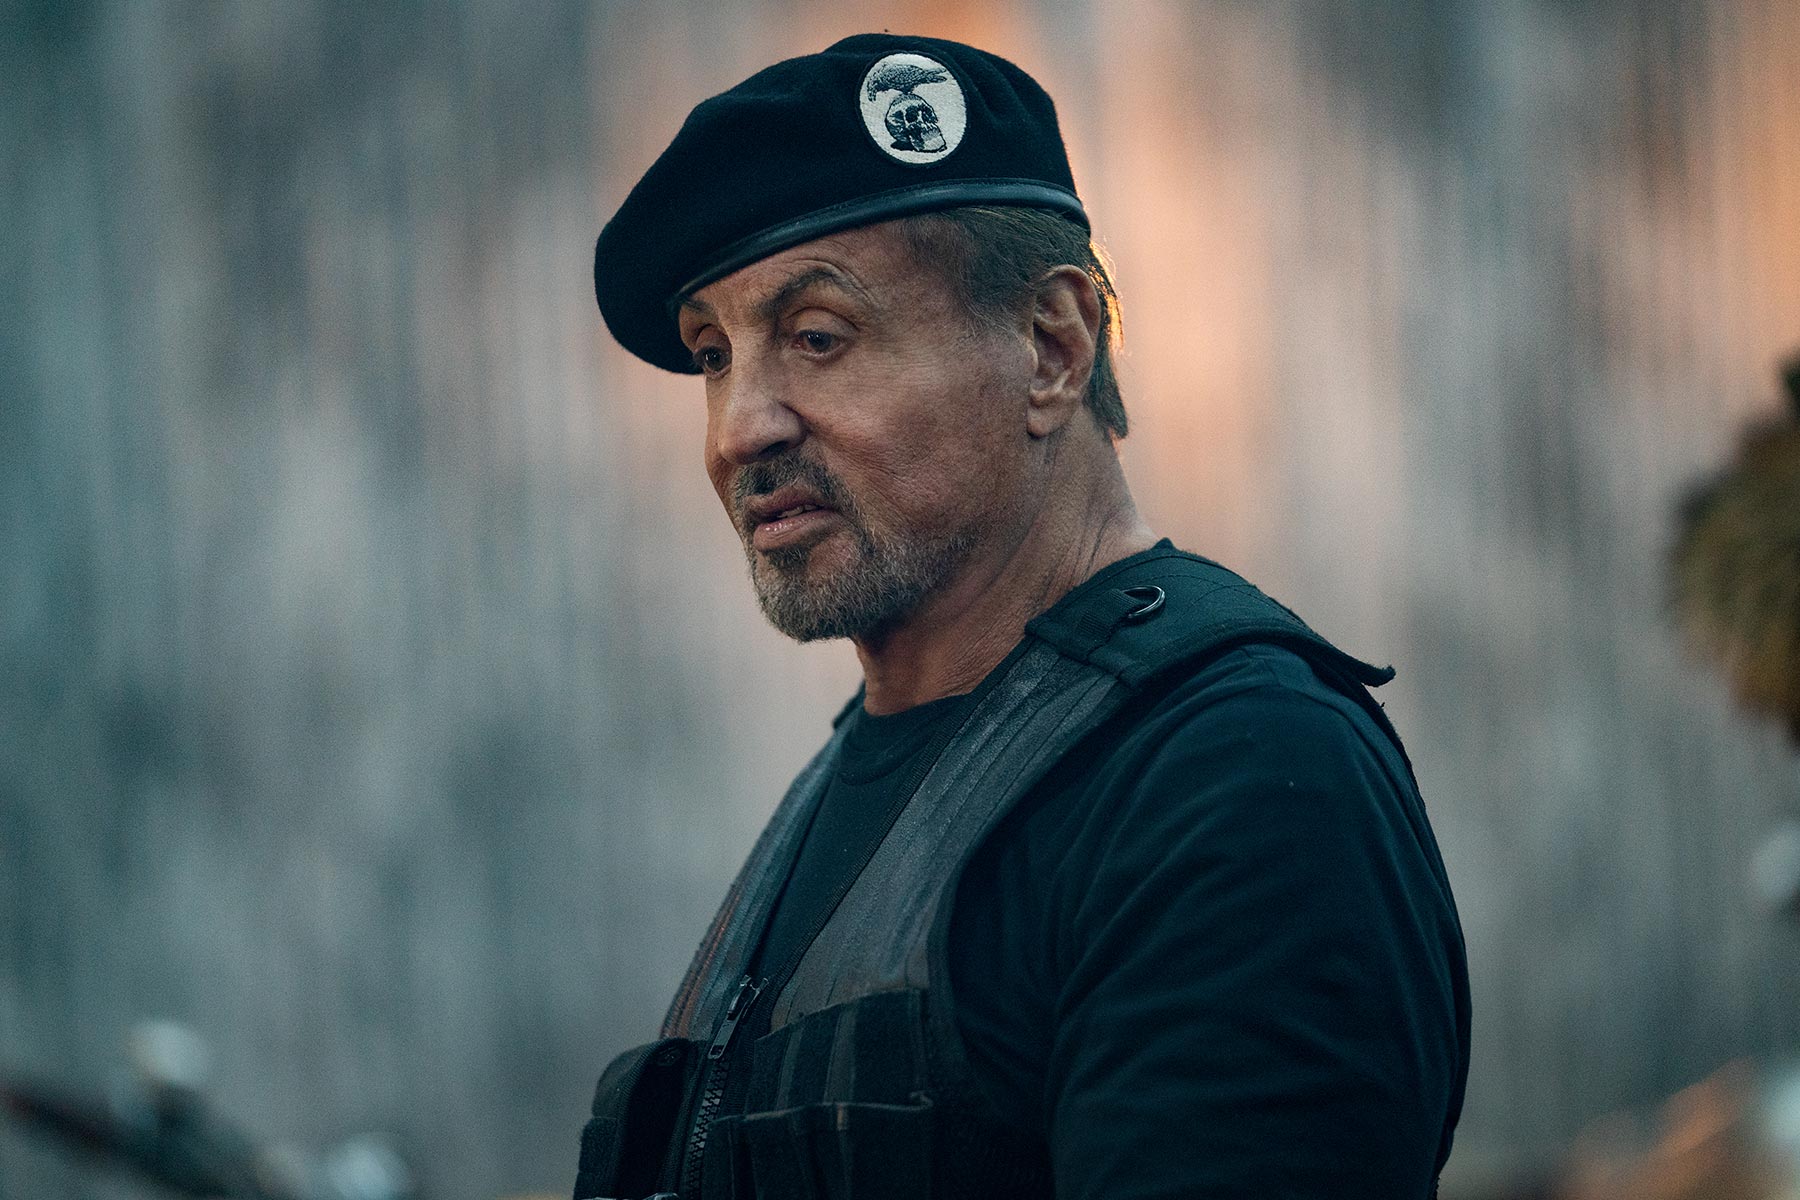 The Expendable 4 - "Expendables 4" Guns N53 Million In Ten Days